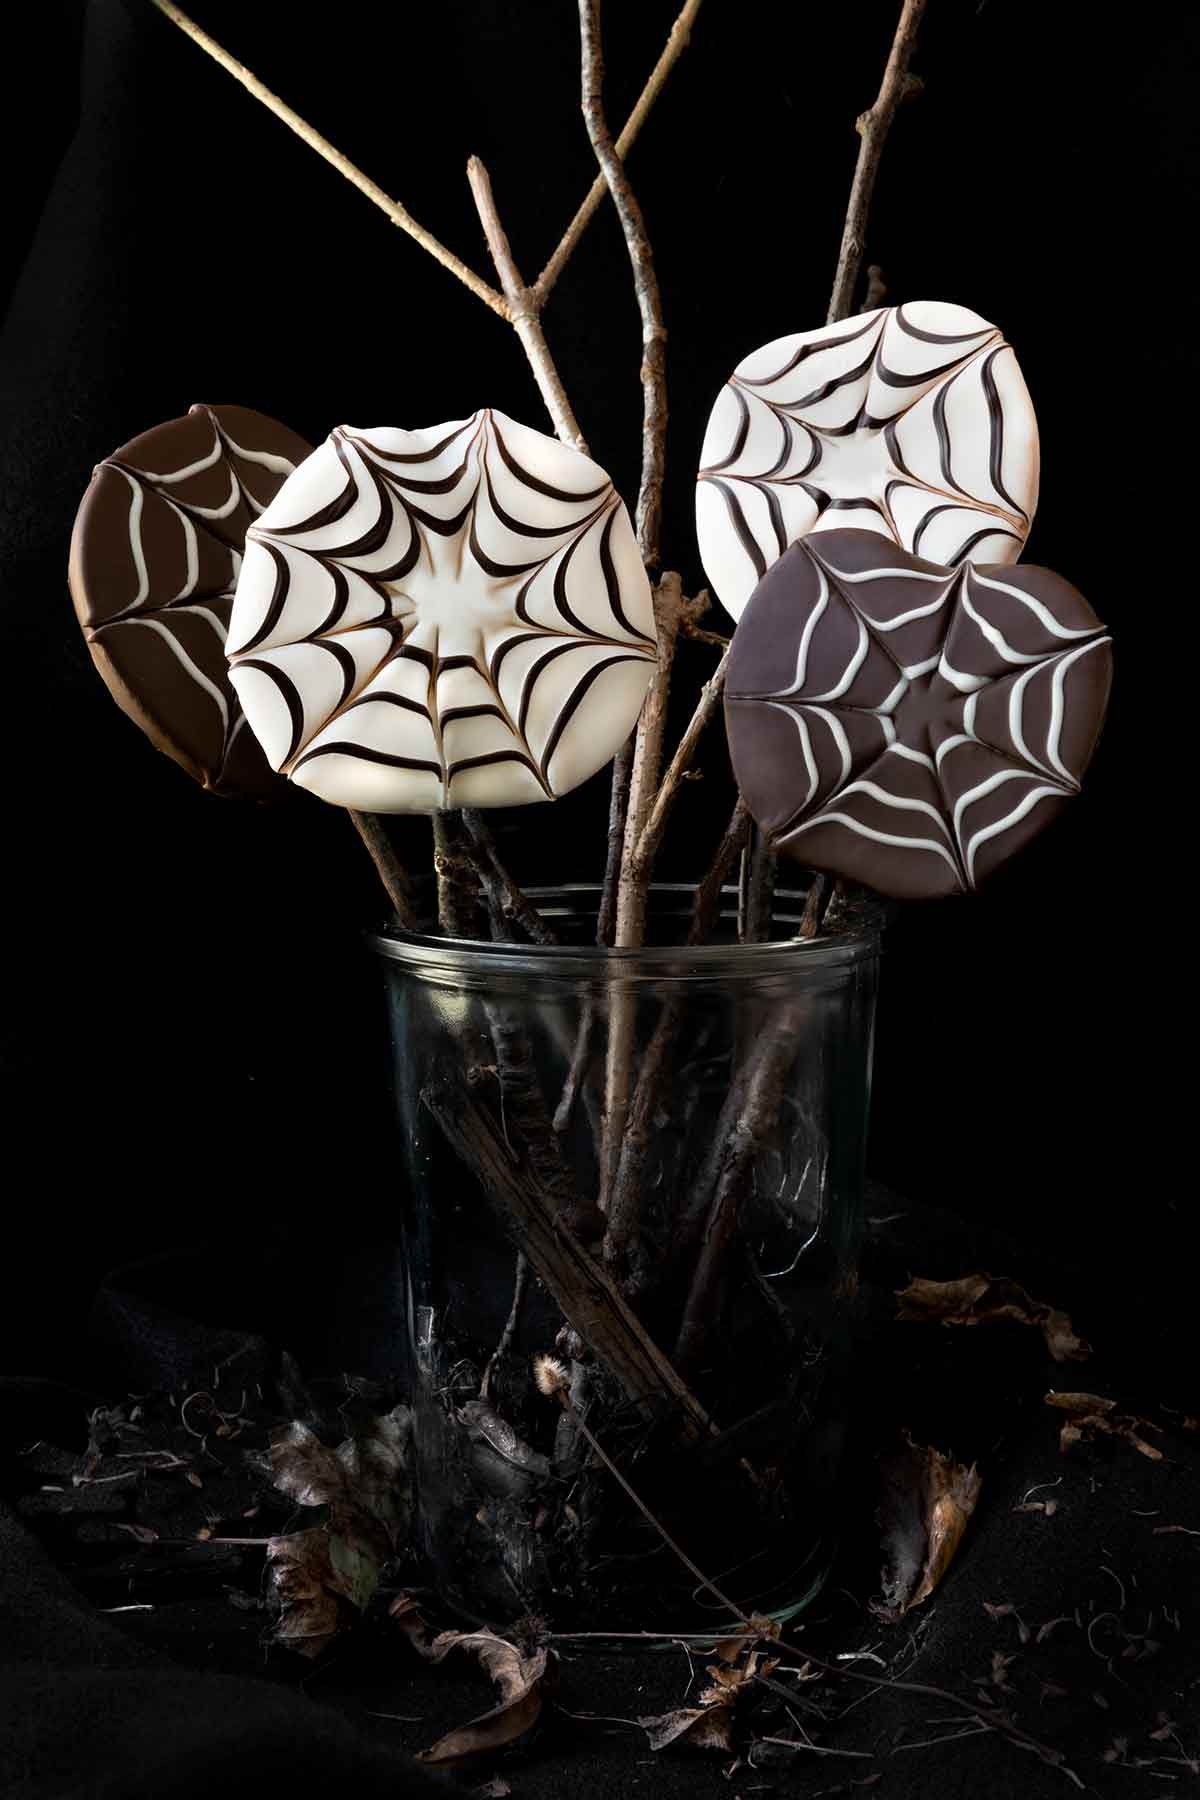 Four chocolate covered apple slices in a vase with some wooden sticks.